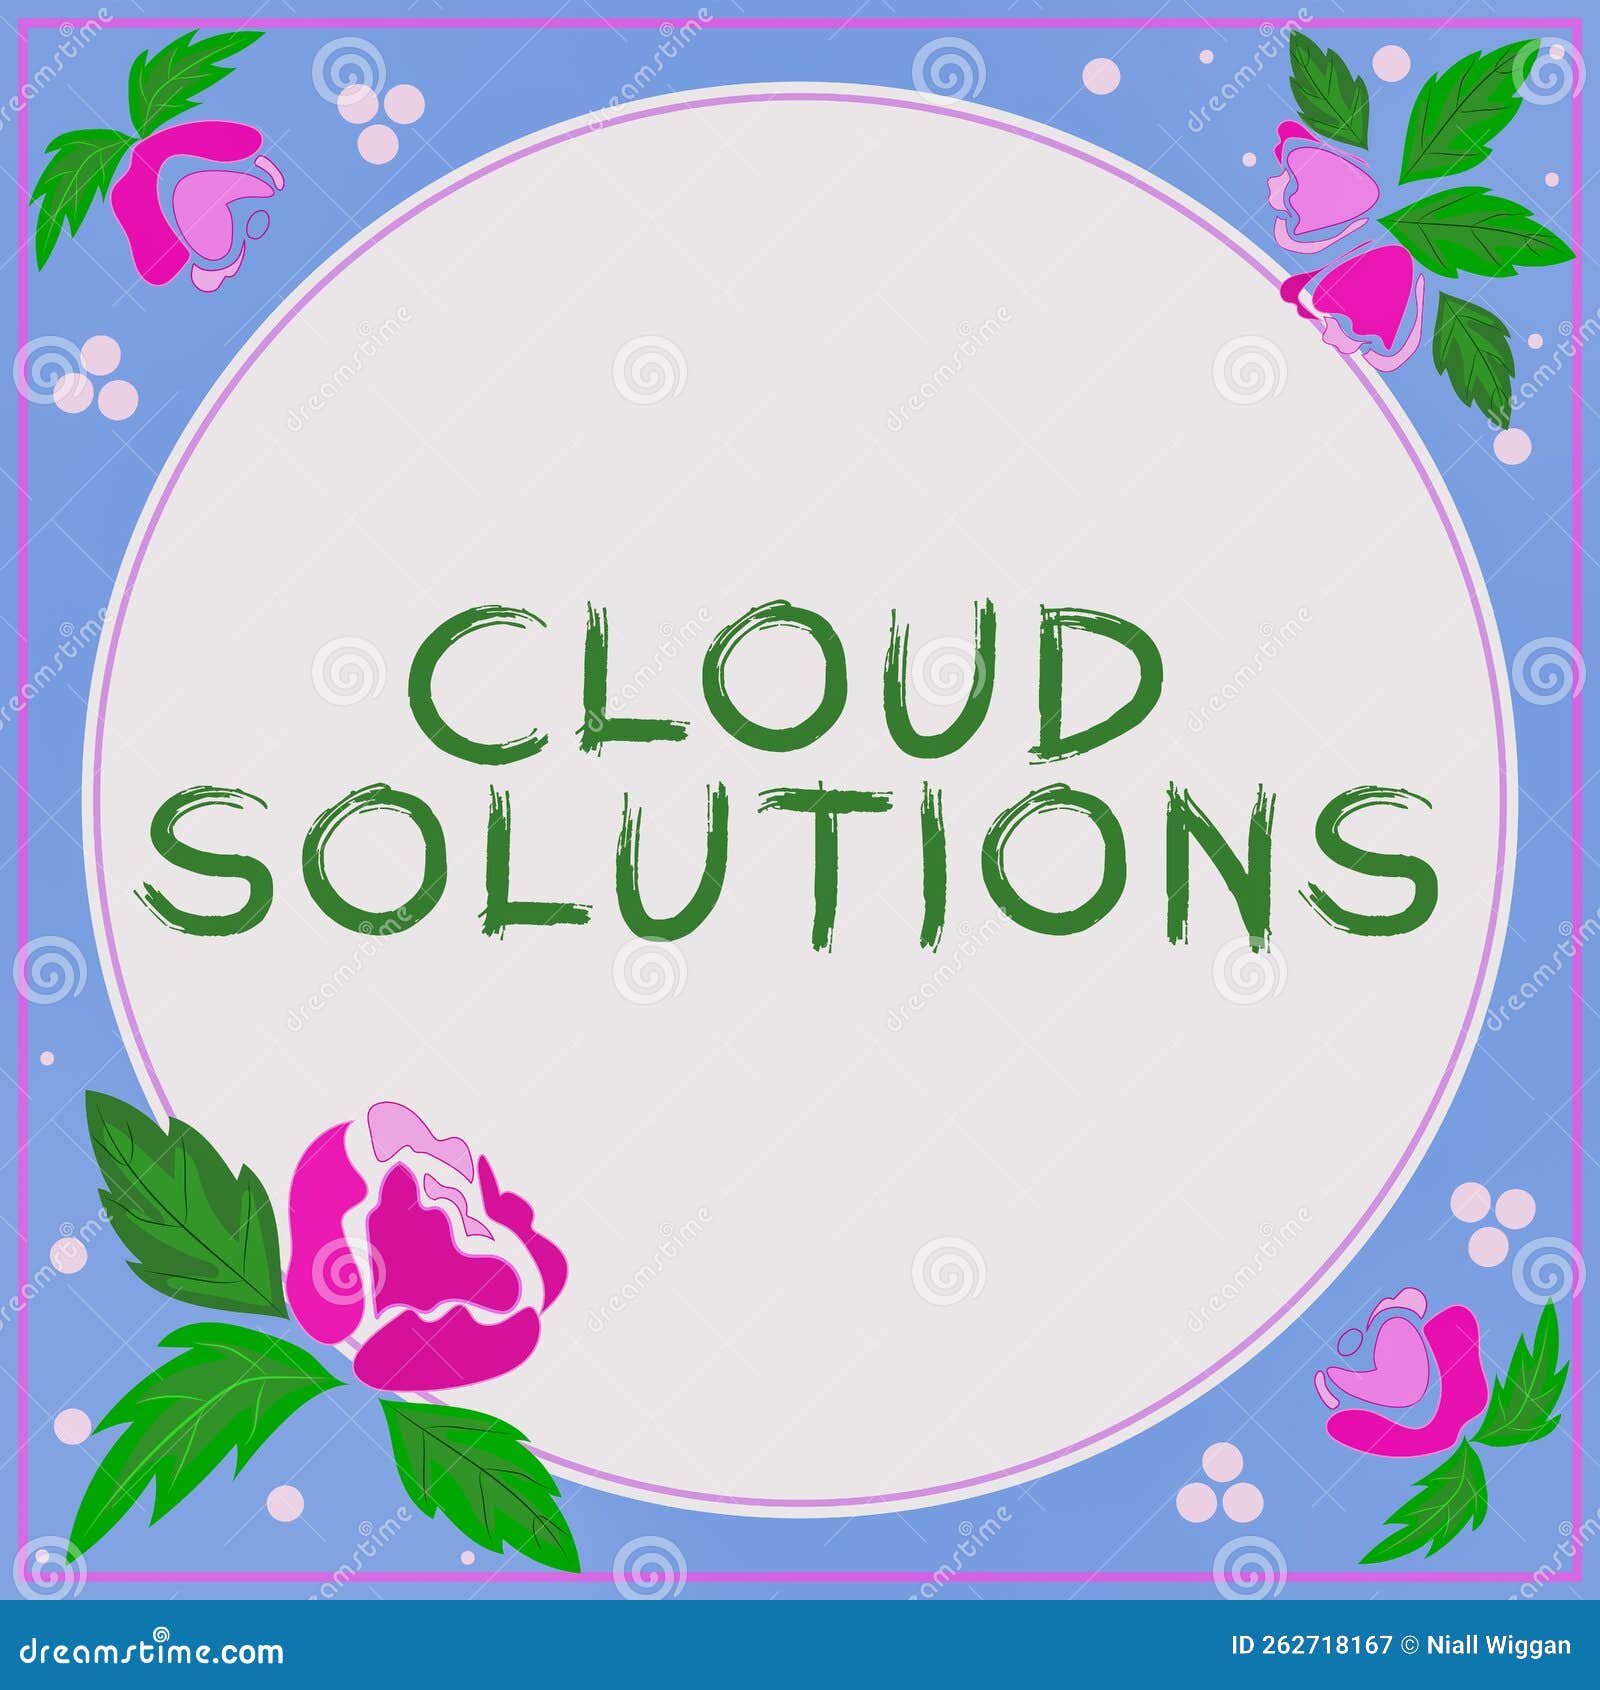 conceptual display cloud solutions. business overview ondemand services or resources accessed via the internet